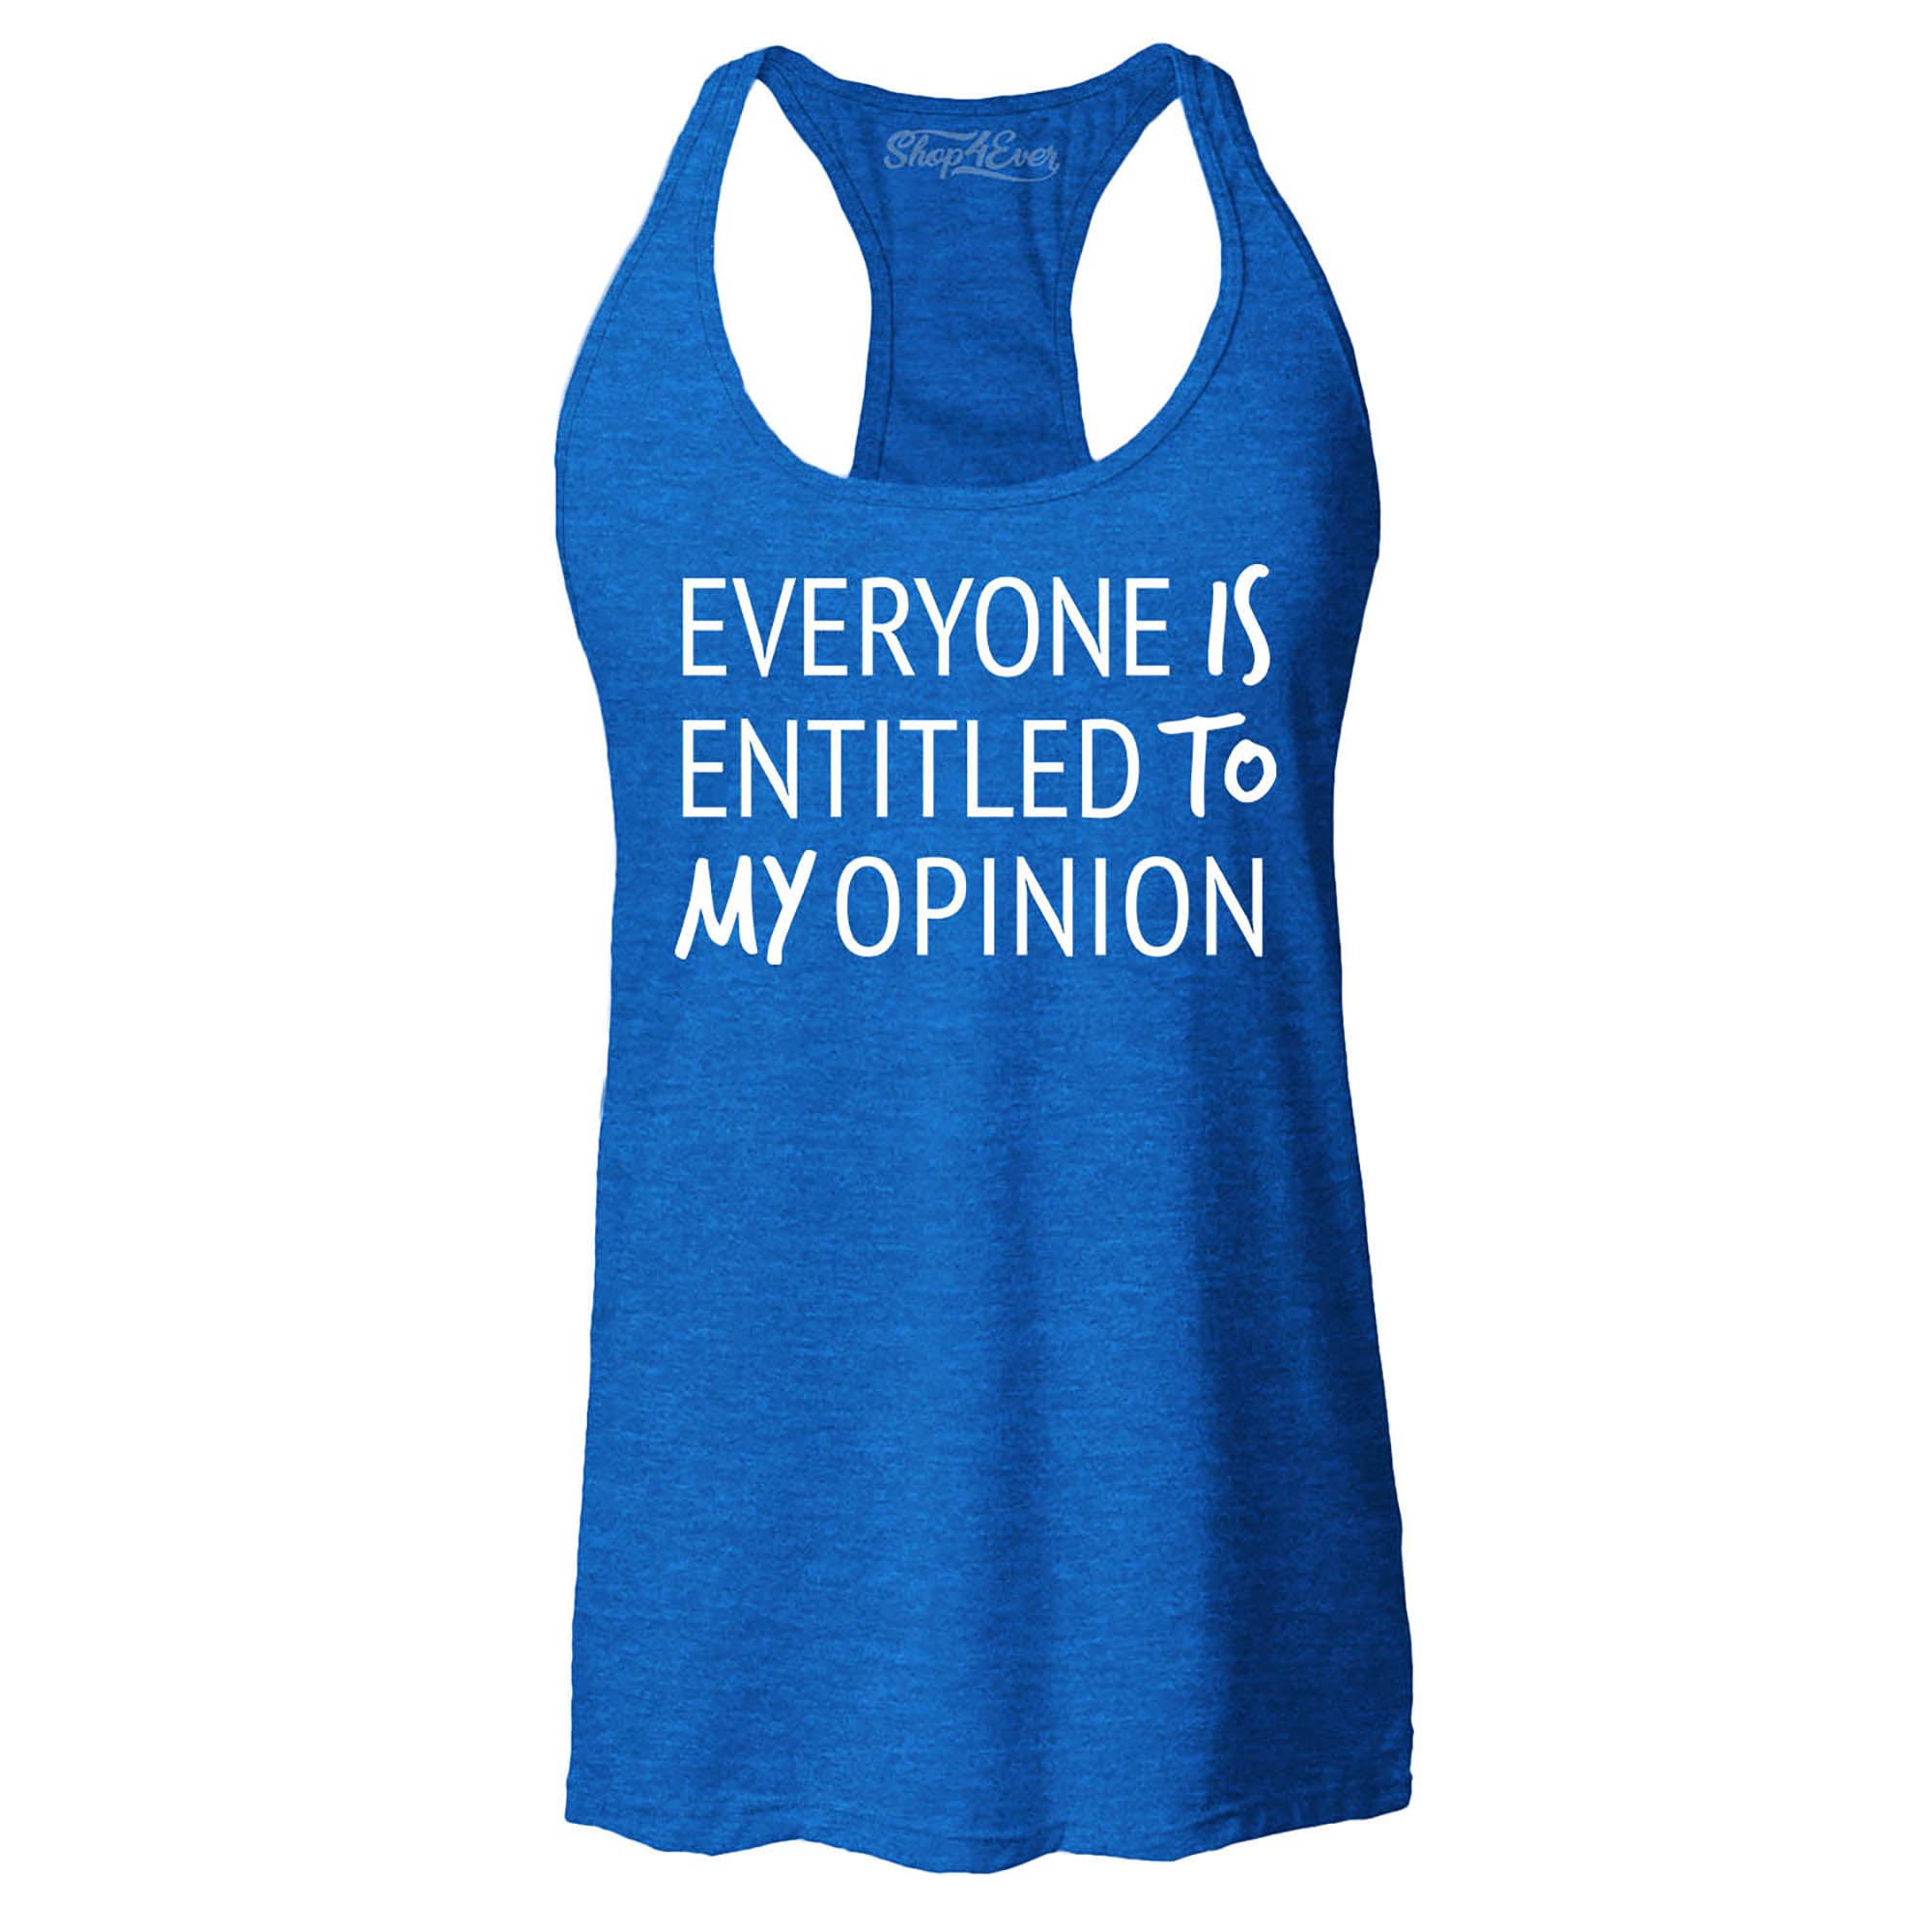 Everyone is Entitled to My Opinion Funny Sarcastic Women's Racerback Tank Top Slim Fit